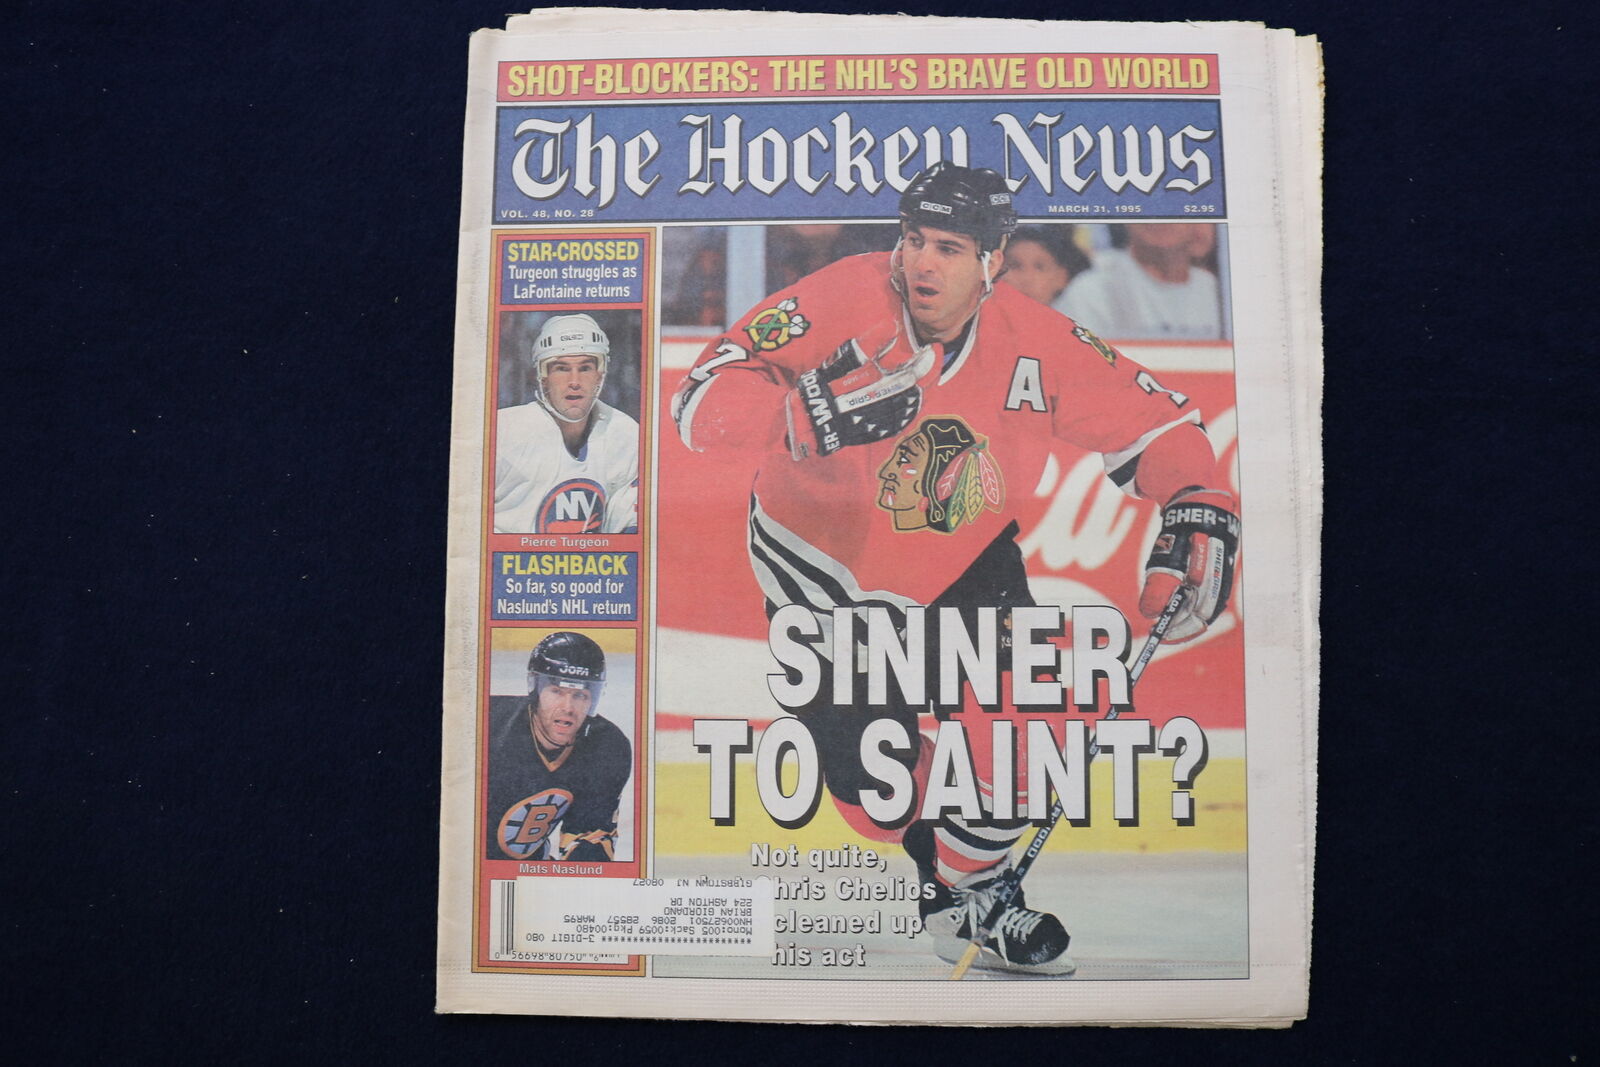 1995 MARCH 31 THE HOCKEY NEWS NEWSPAPER - CHRIS CHELIOS COVER - NP 8739